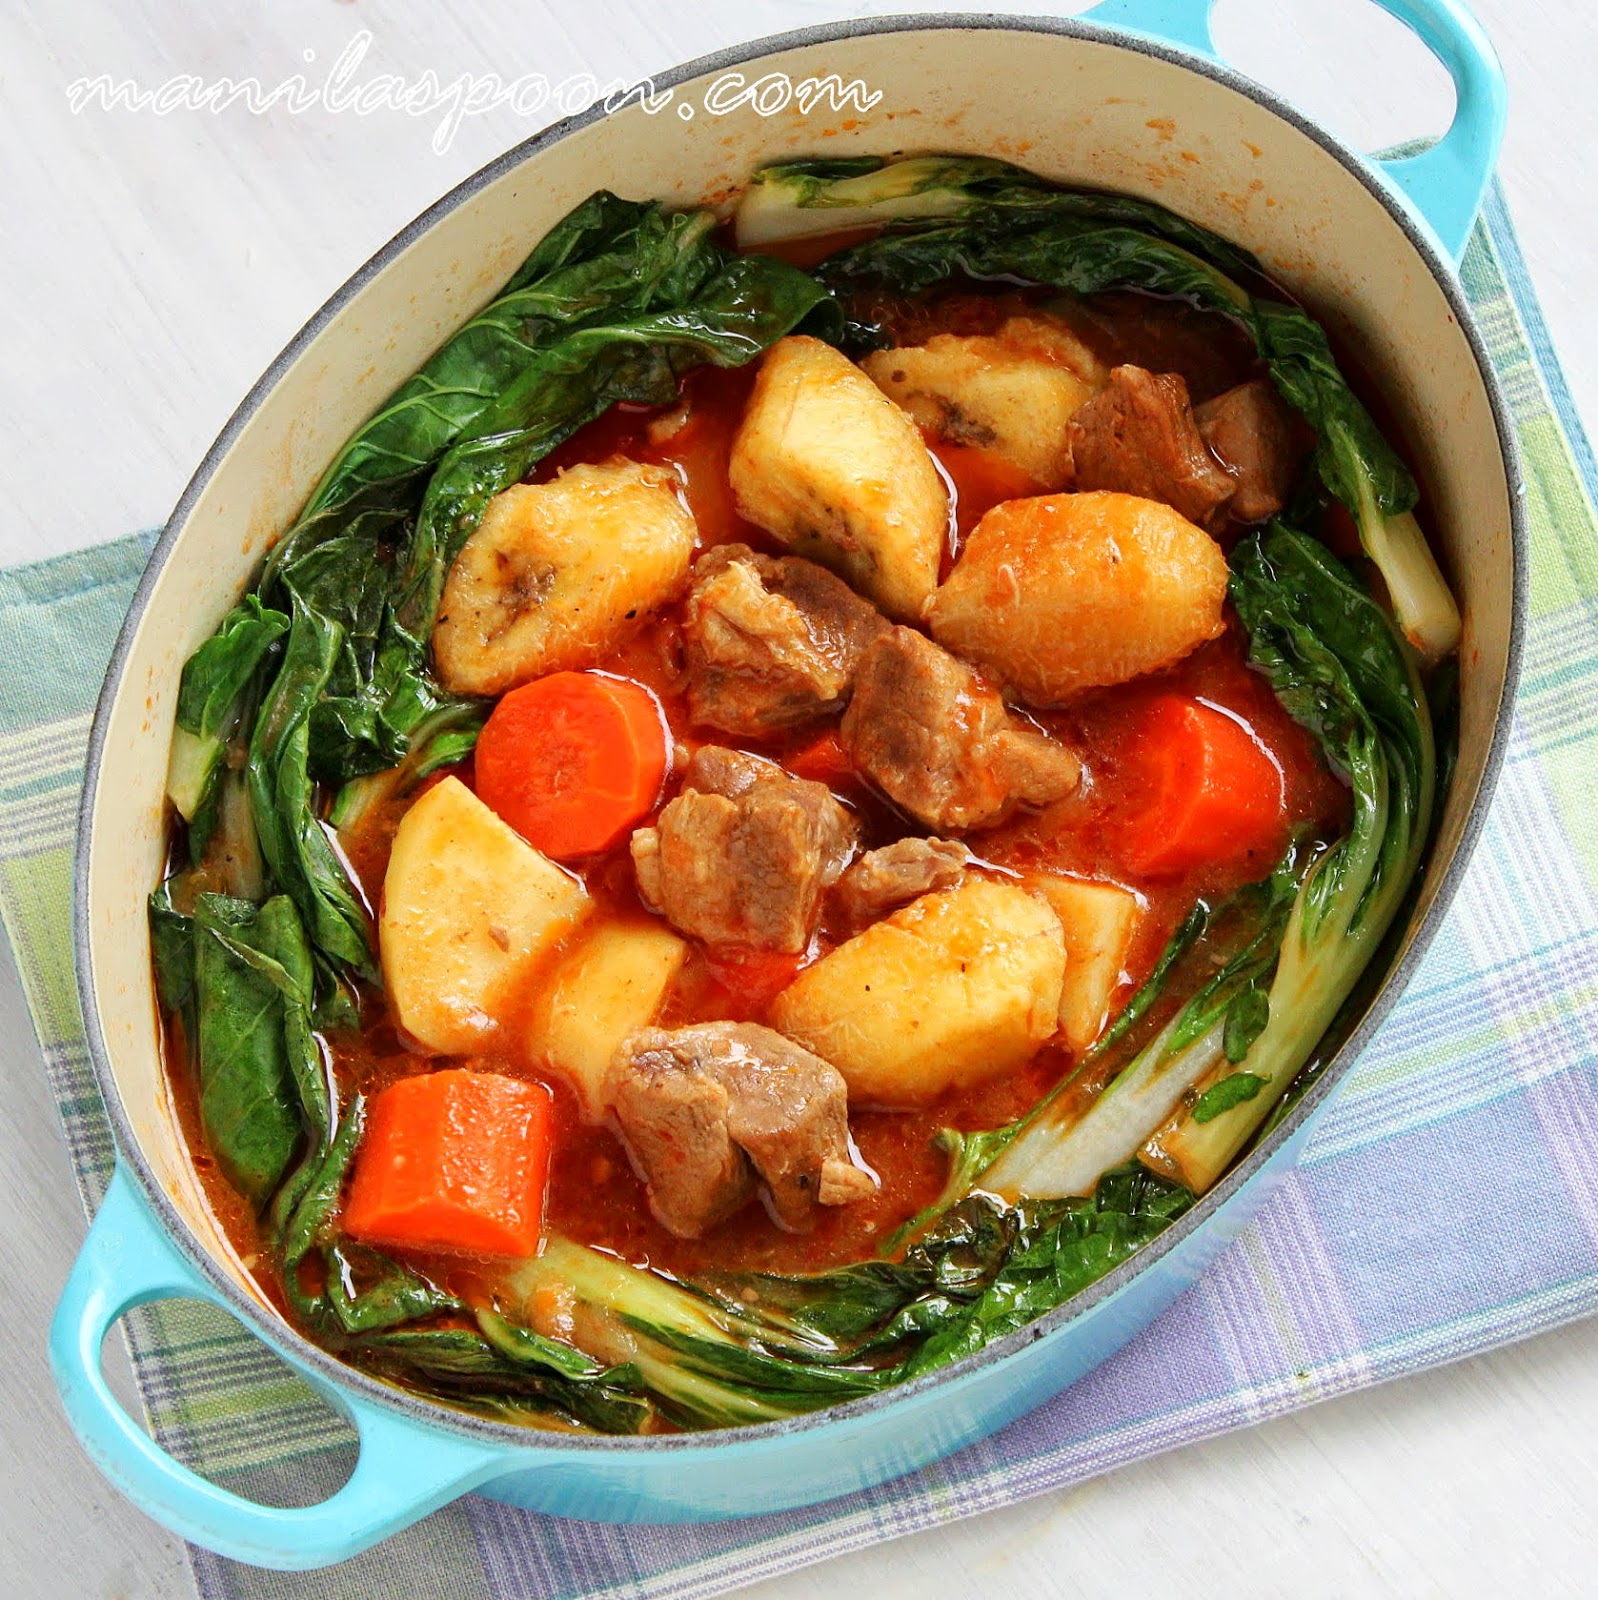 Adding bananas into this melt-in-your-mouth tender beef or pork stew brings so much flavor and richness to this Asian classic. This Filipino stew is a huge family favorite and a dish you'll make over and over again! #pochero #filipinofood #asiancuisine #pork #beef